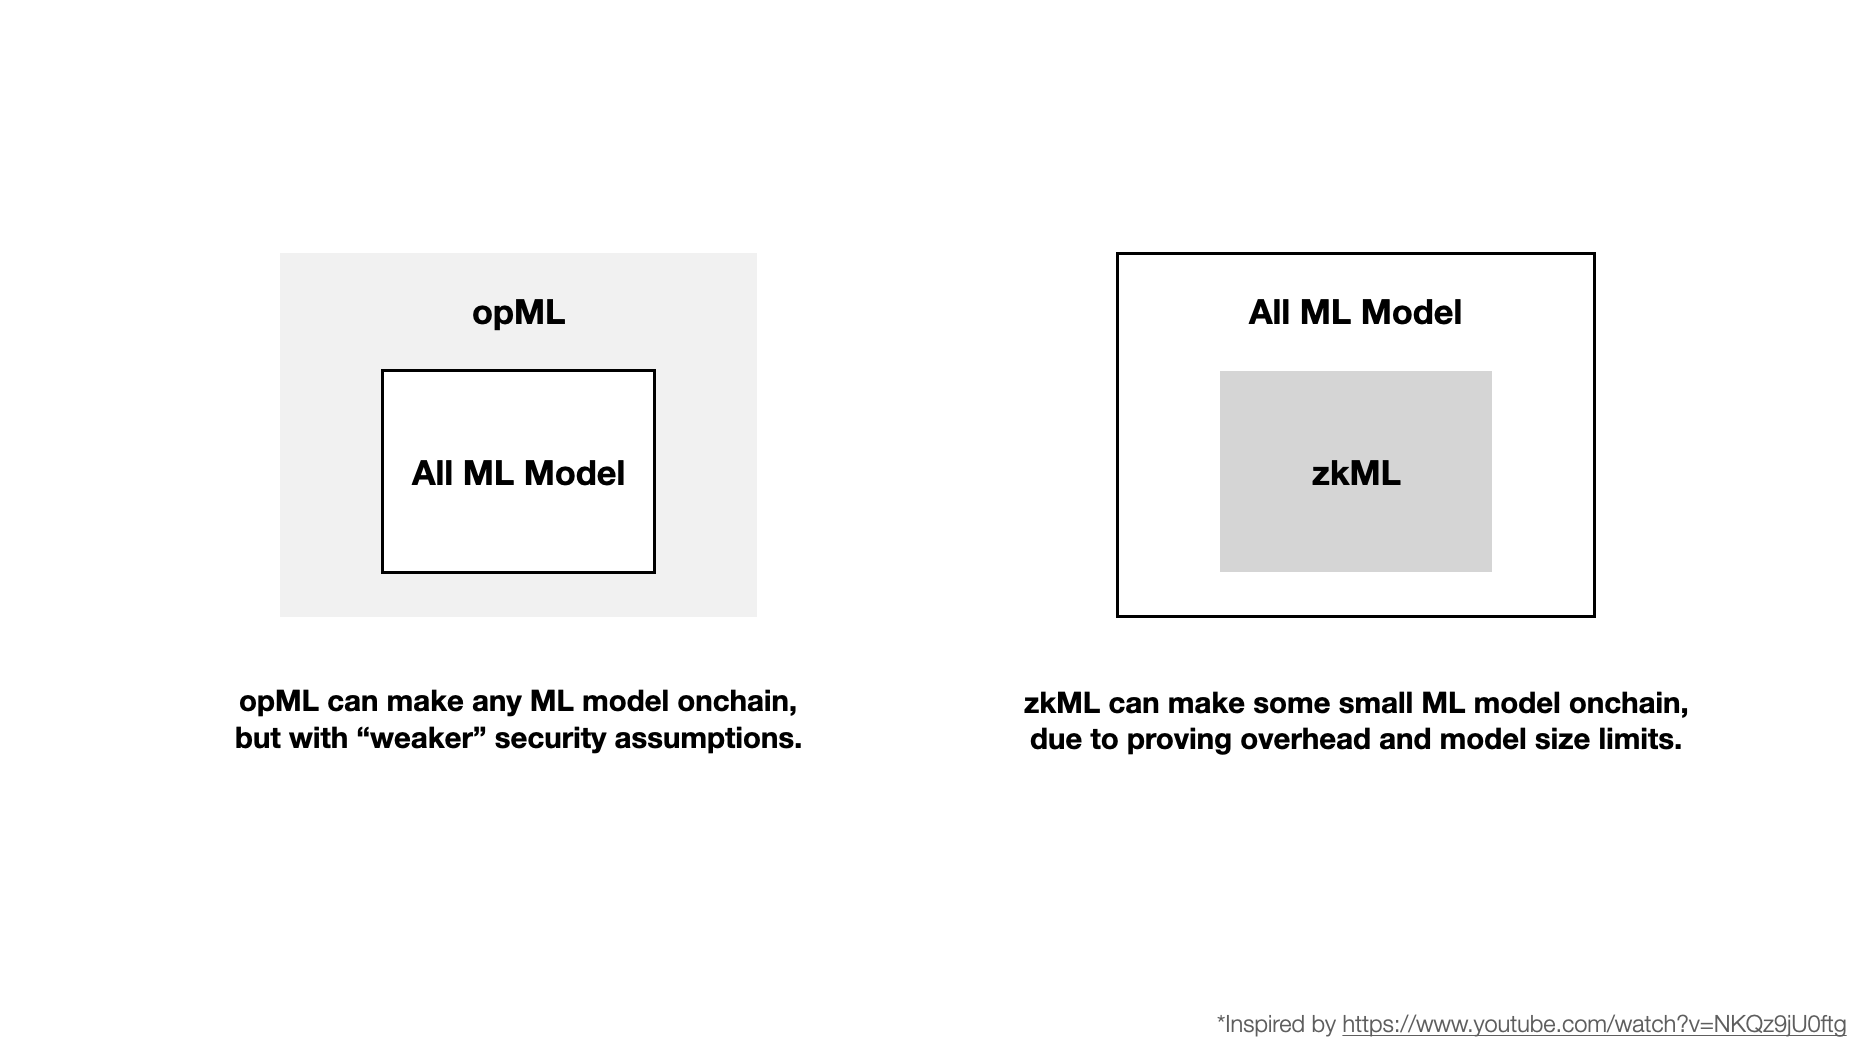 "zkML can run some small ML models onchain” & ”opML can run any ML model onchain”